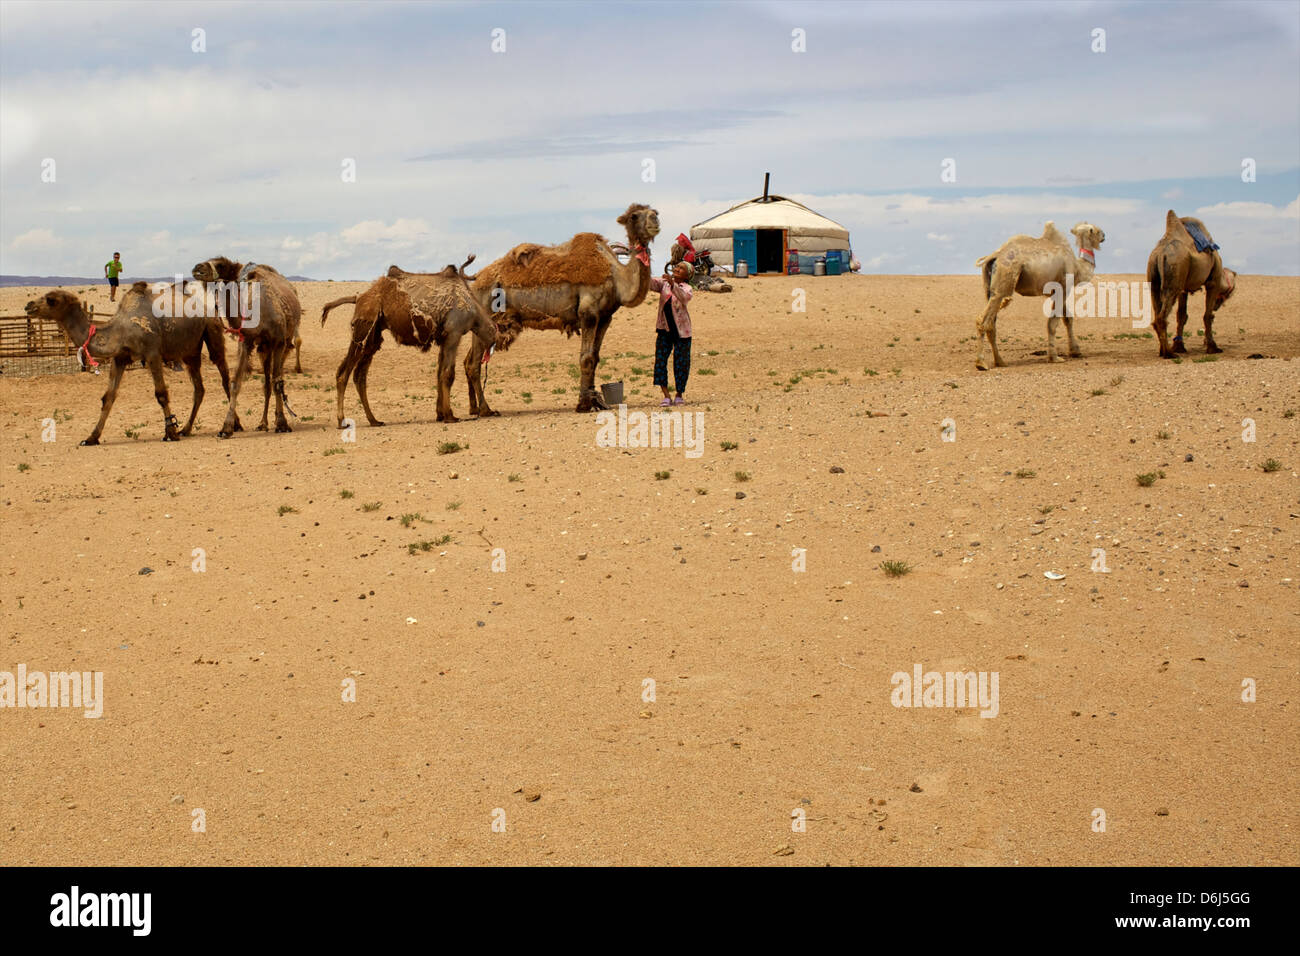 A Mongolian family, yurt and camels in the Gobi desert, Mongolia, Central Asia, Asia Stock Photo